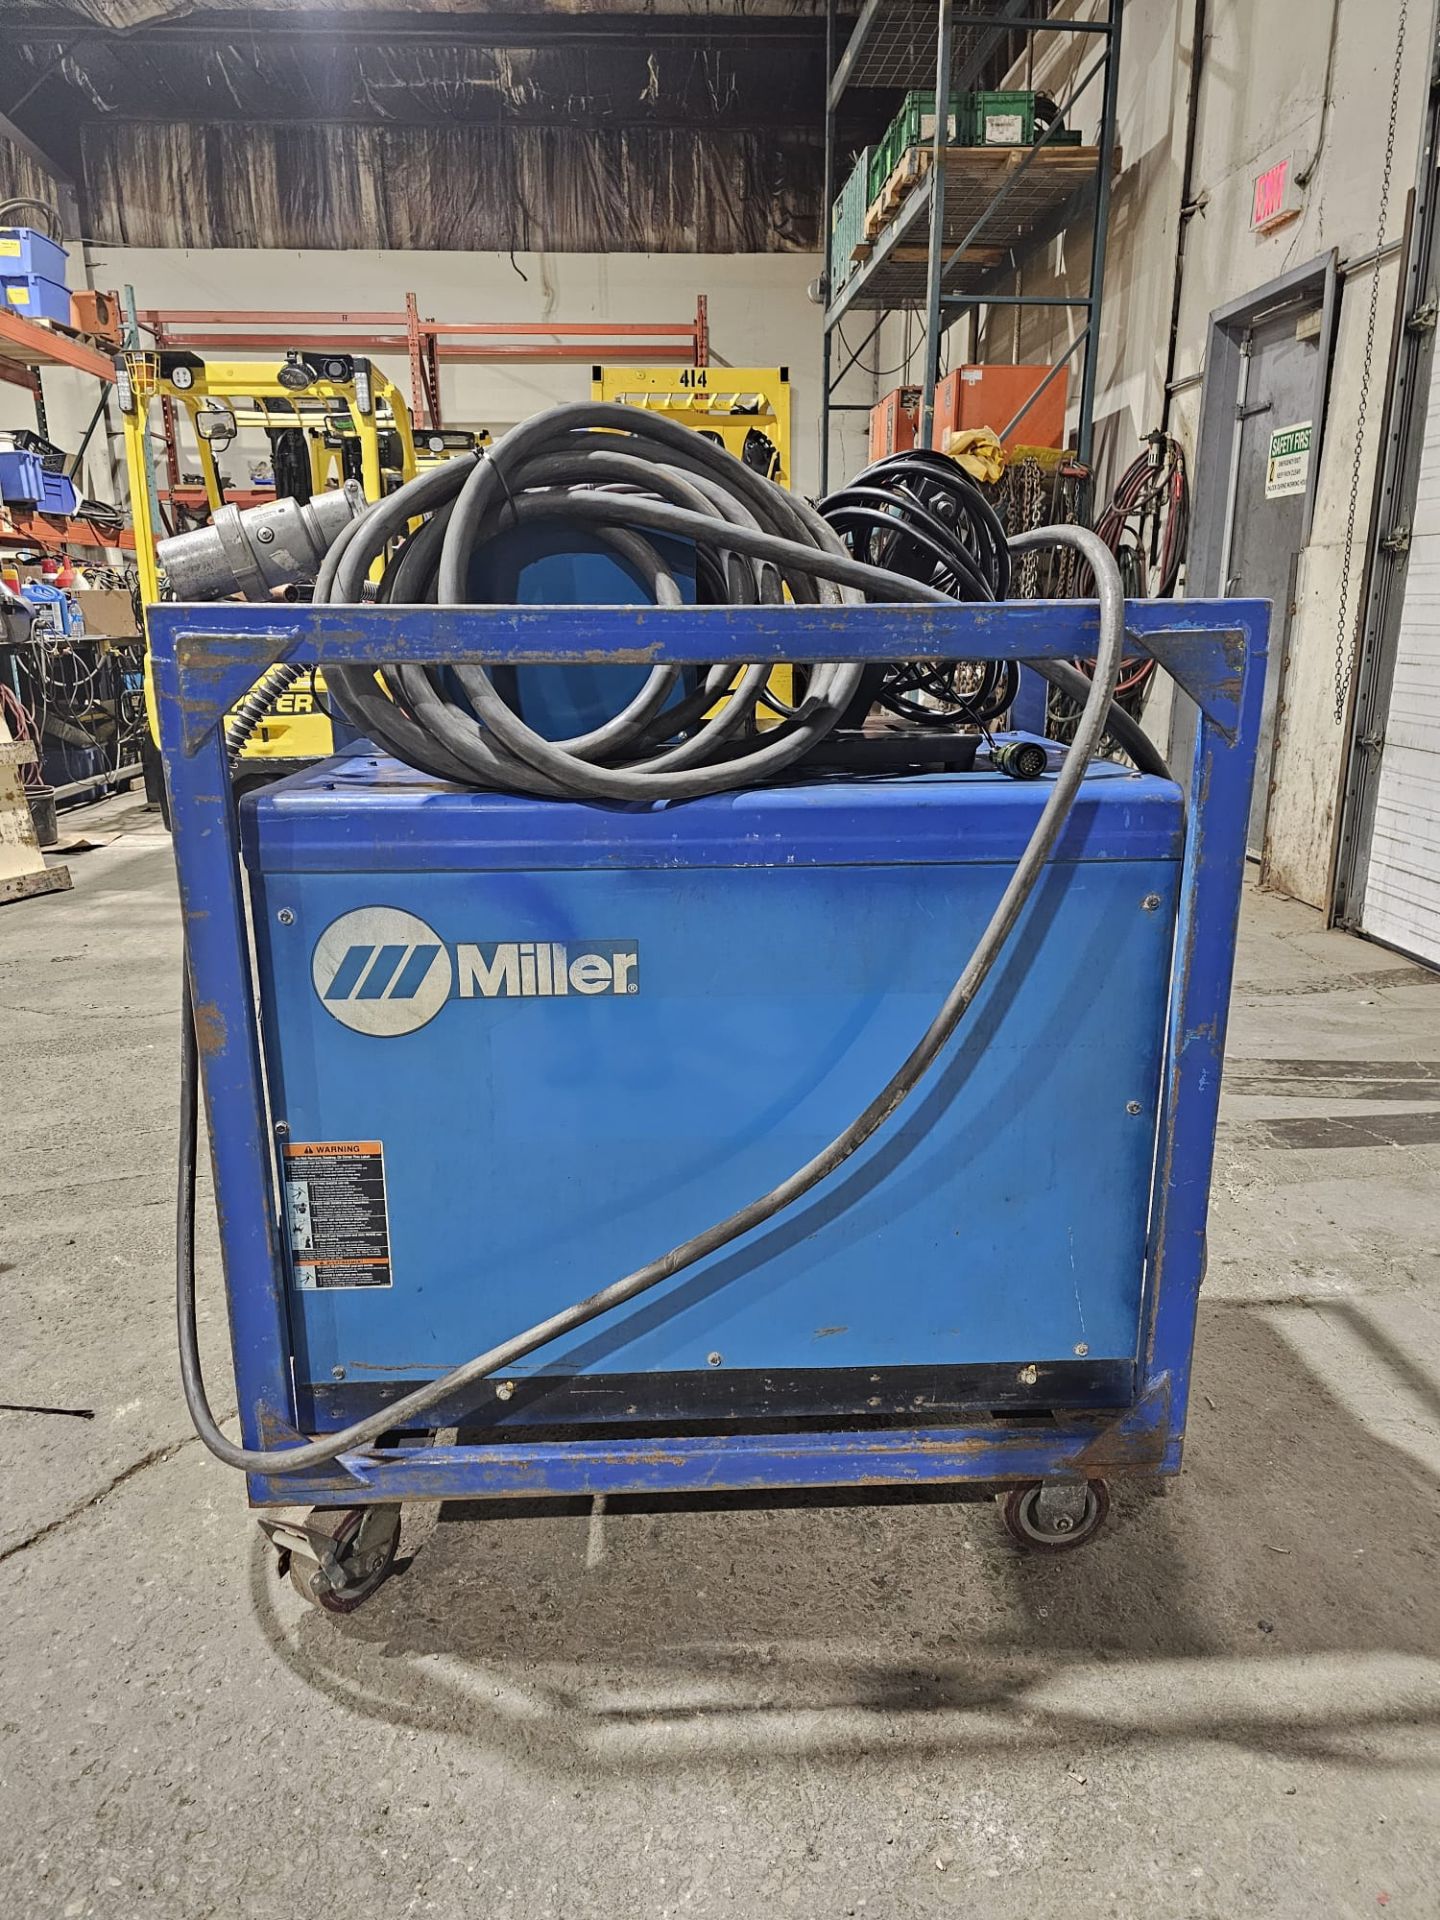 Miller Dimension 652 Mig Welder 650 Amp Mig Tig Stick Multi Process Power Source with 22A Wire - Image 7 of 10